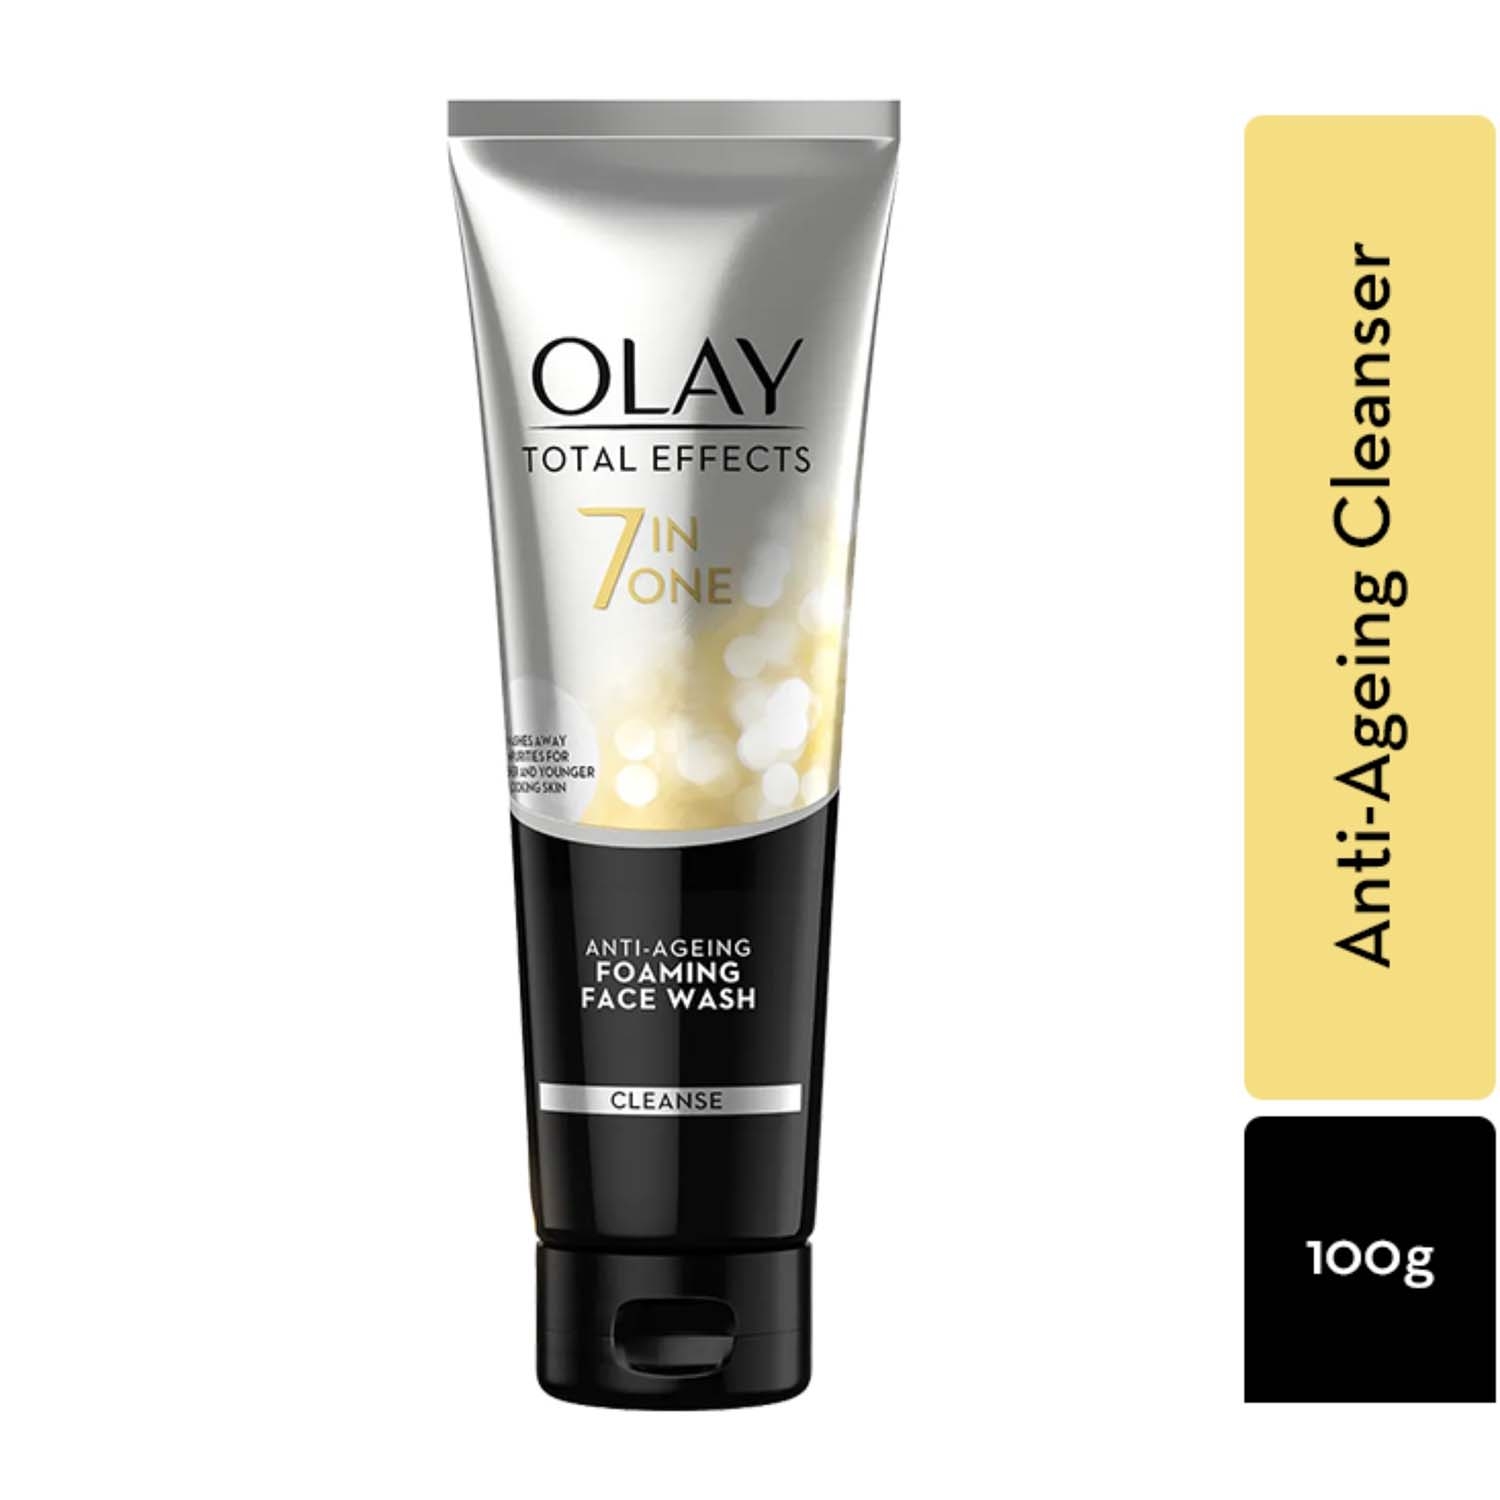 Olay | Olay 7-In-1 Total Effects Foaming Cleanser (100g)